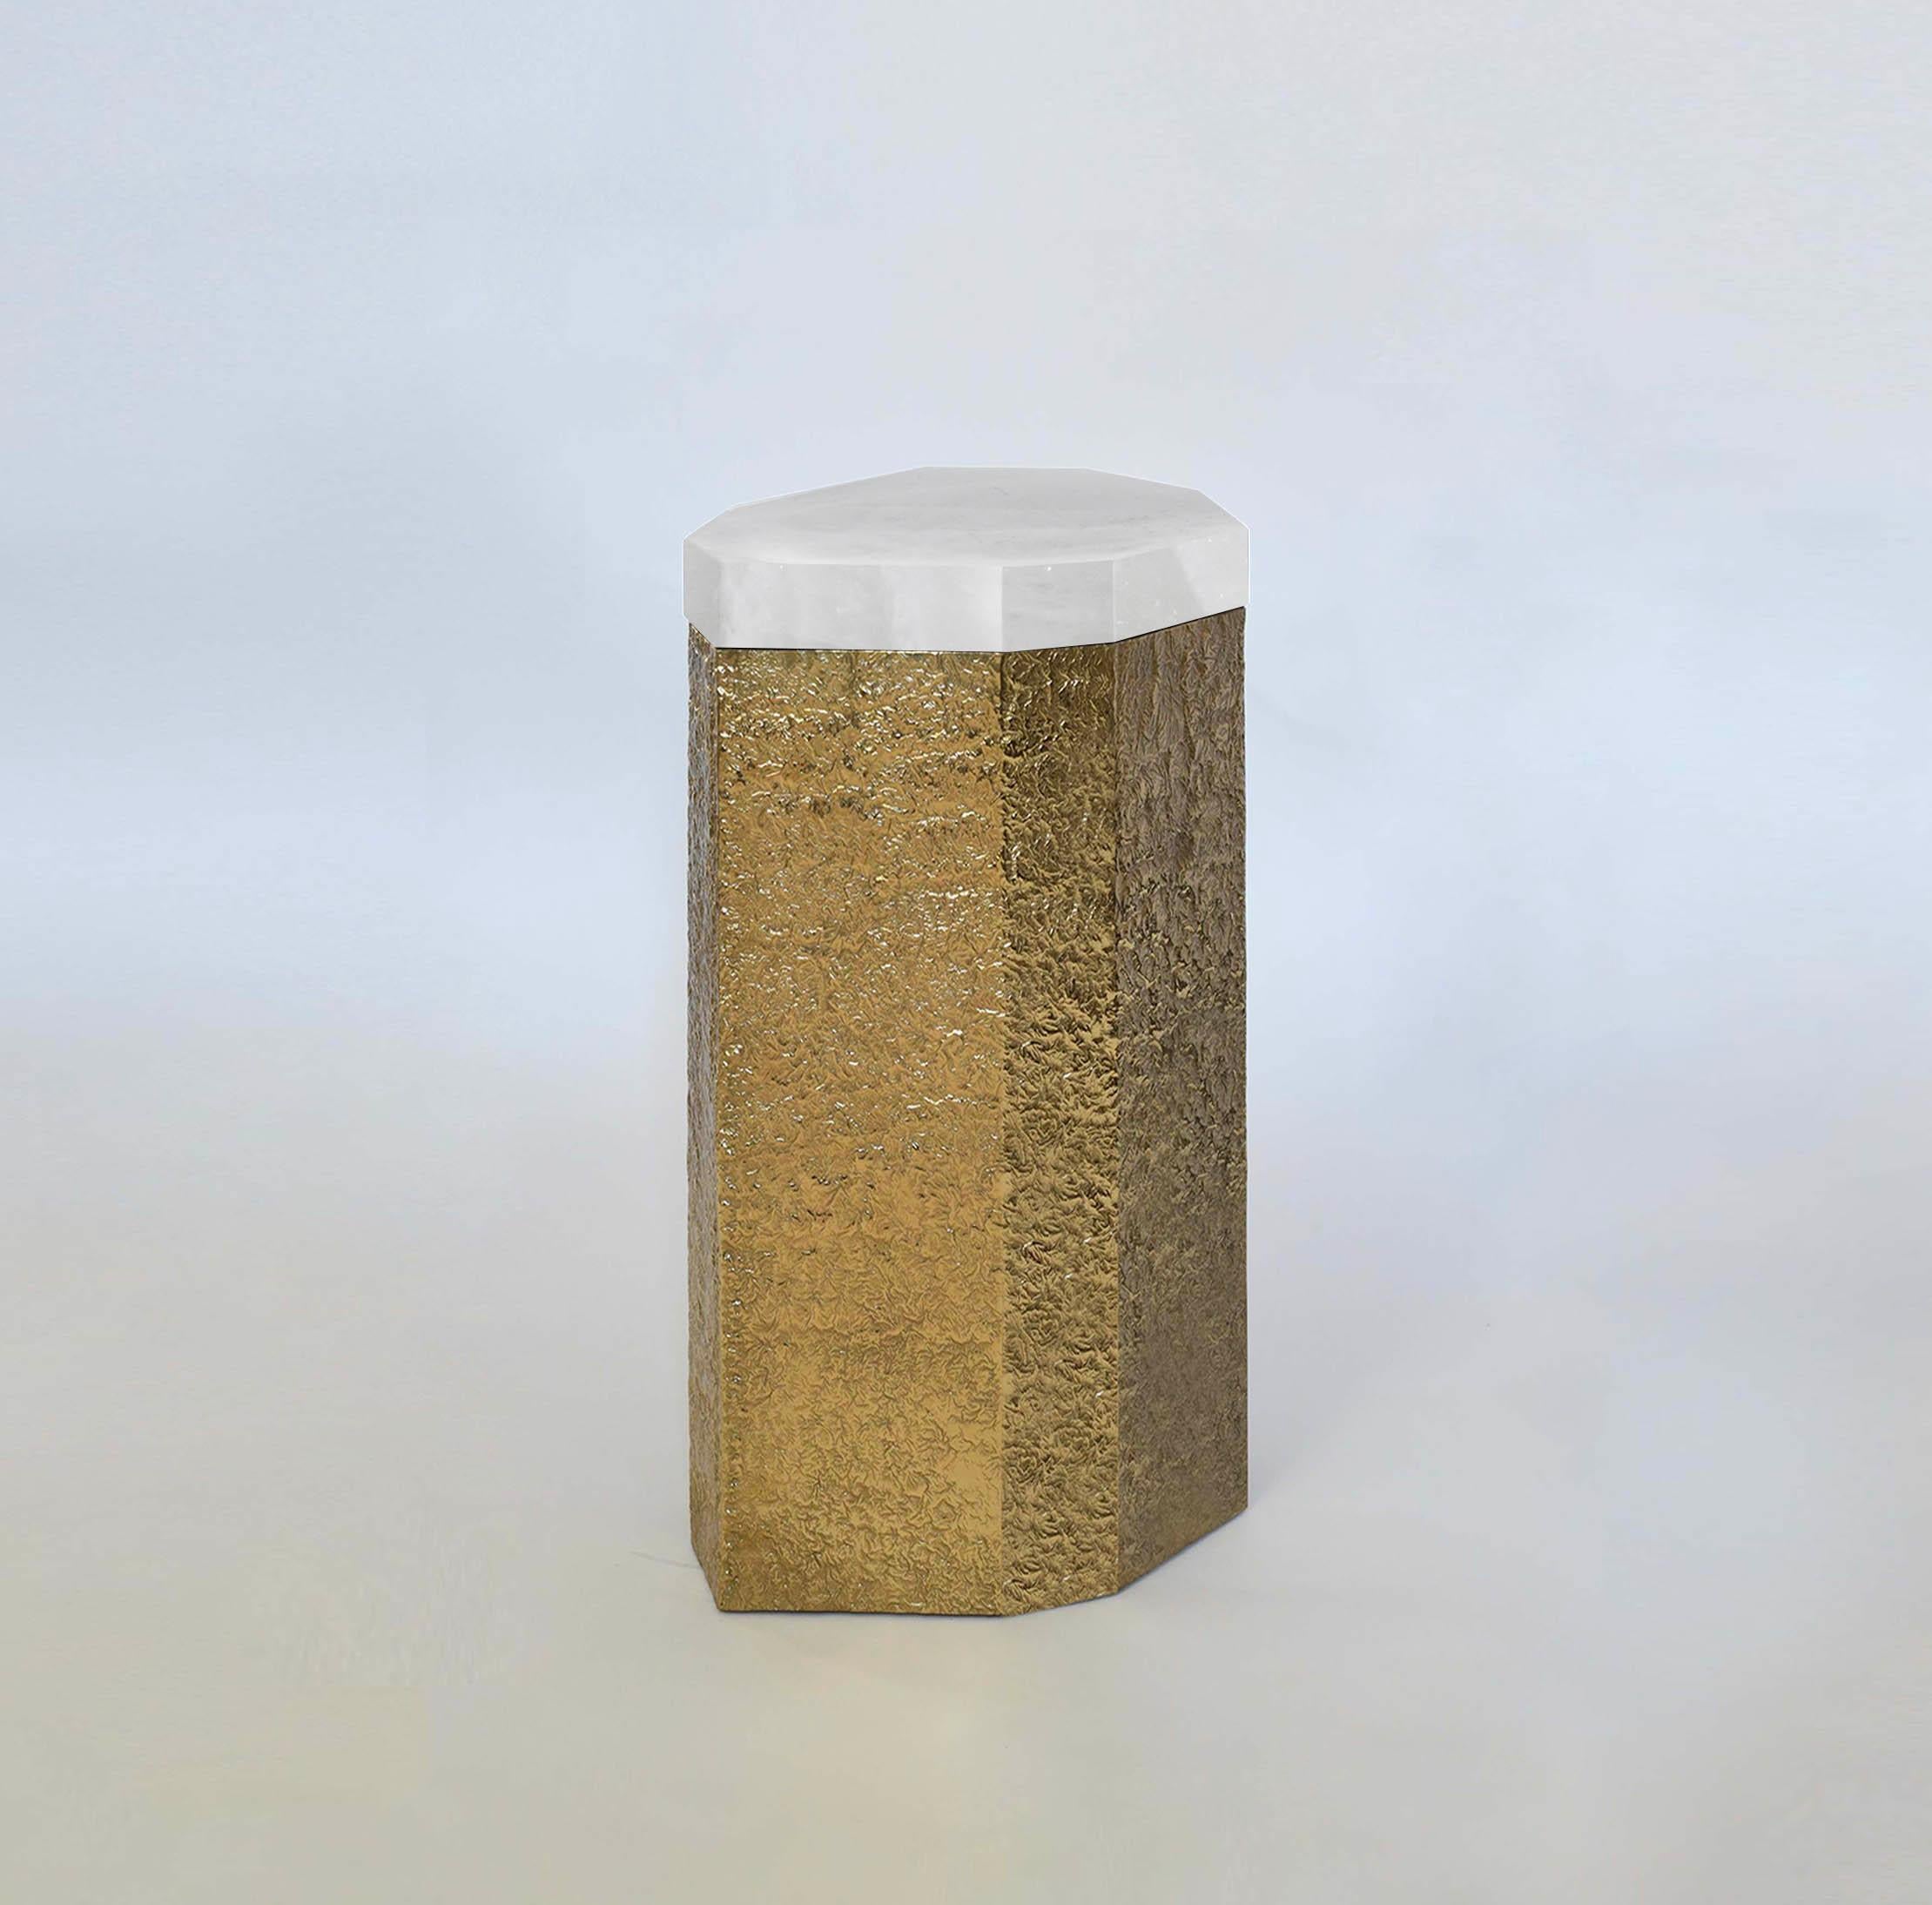 Nine angles rock crystal side table with hammered brass base. Created by Phoenix Gallery, NYC.
Custom size, quantity, and finish upon request.